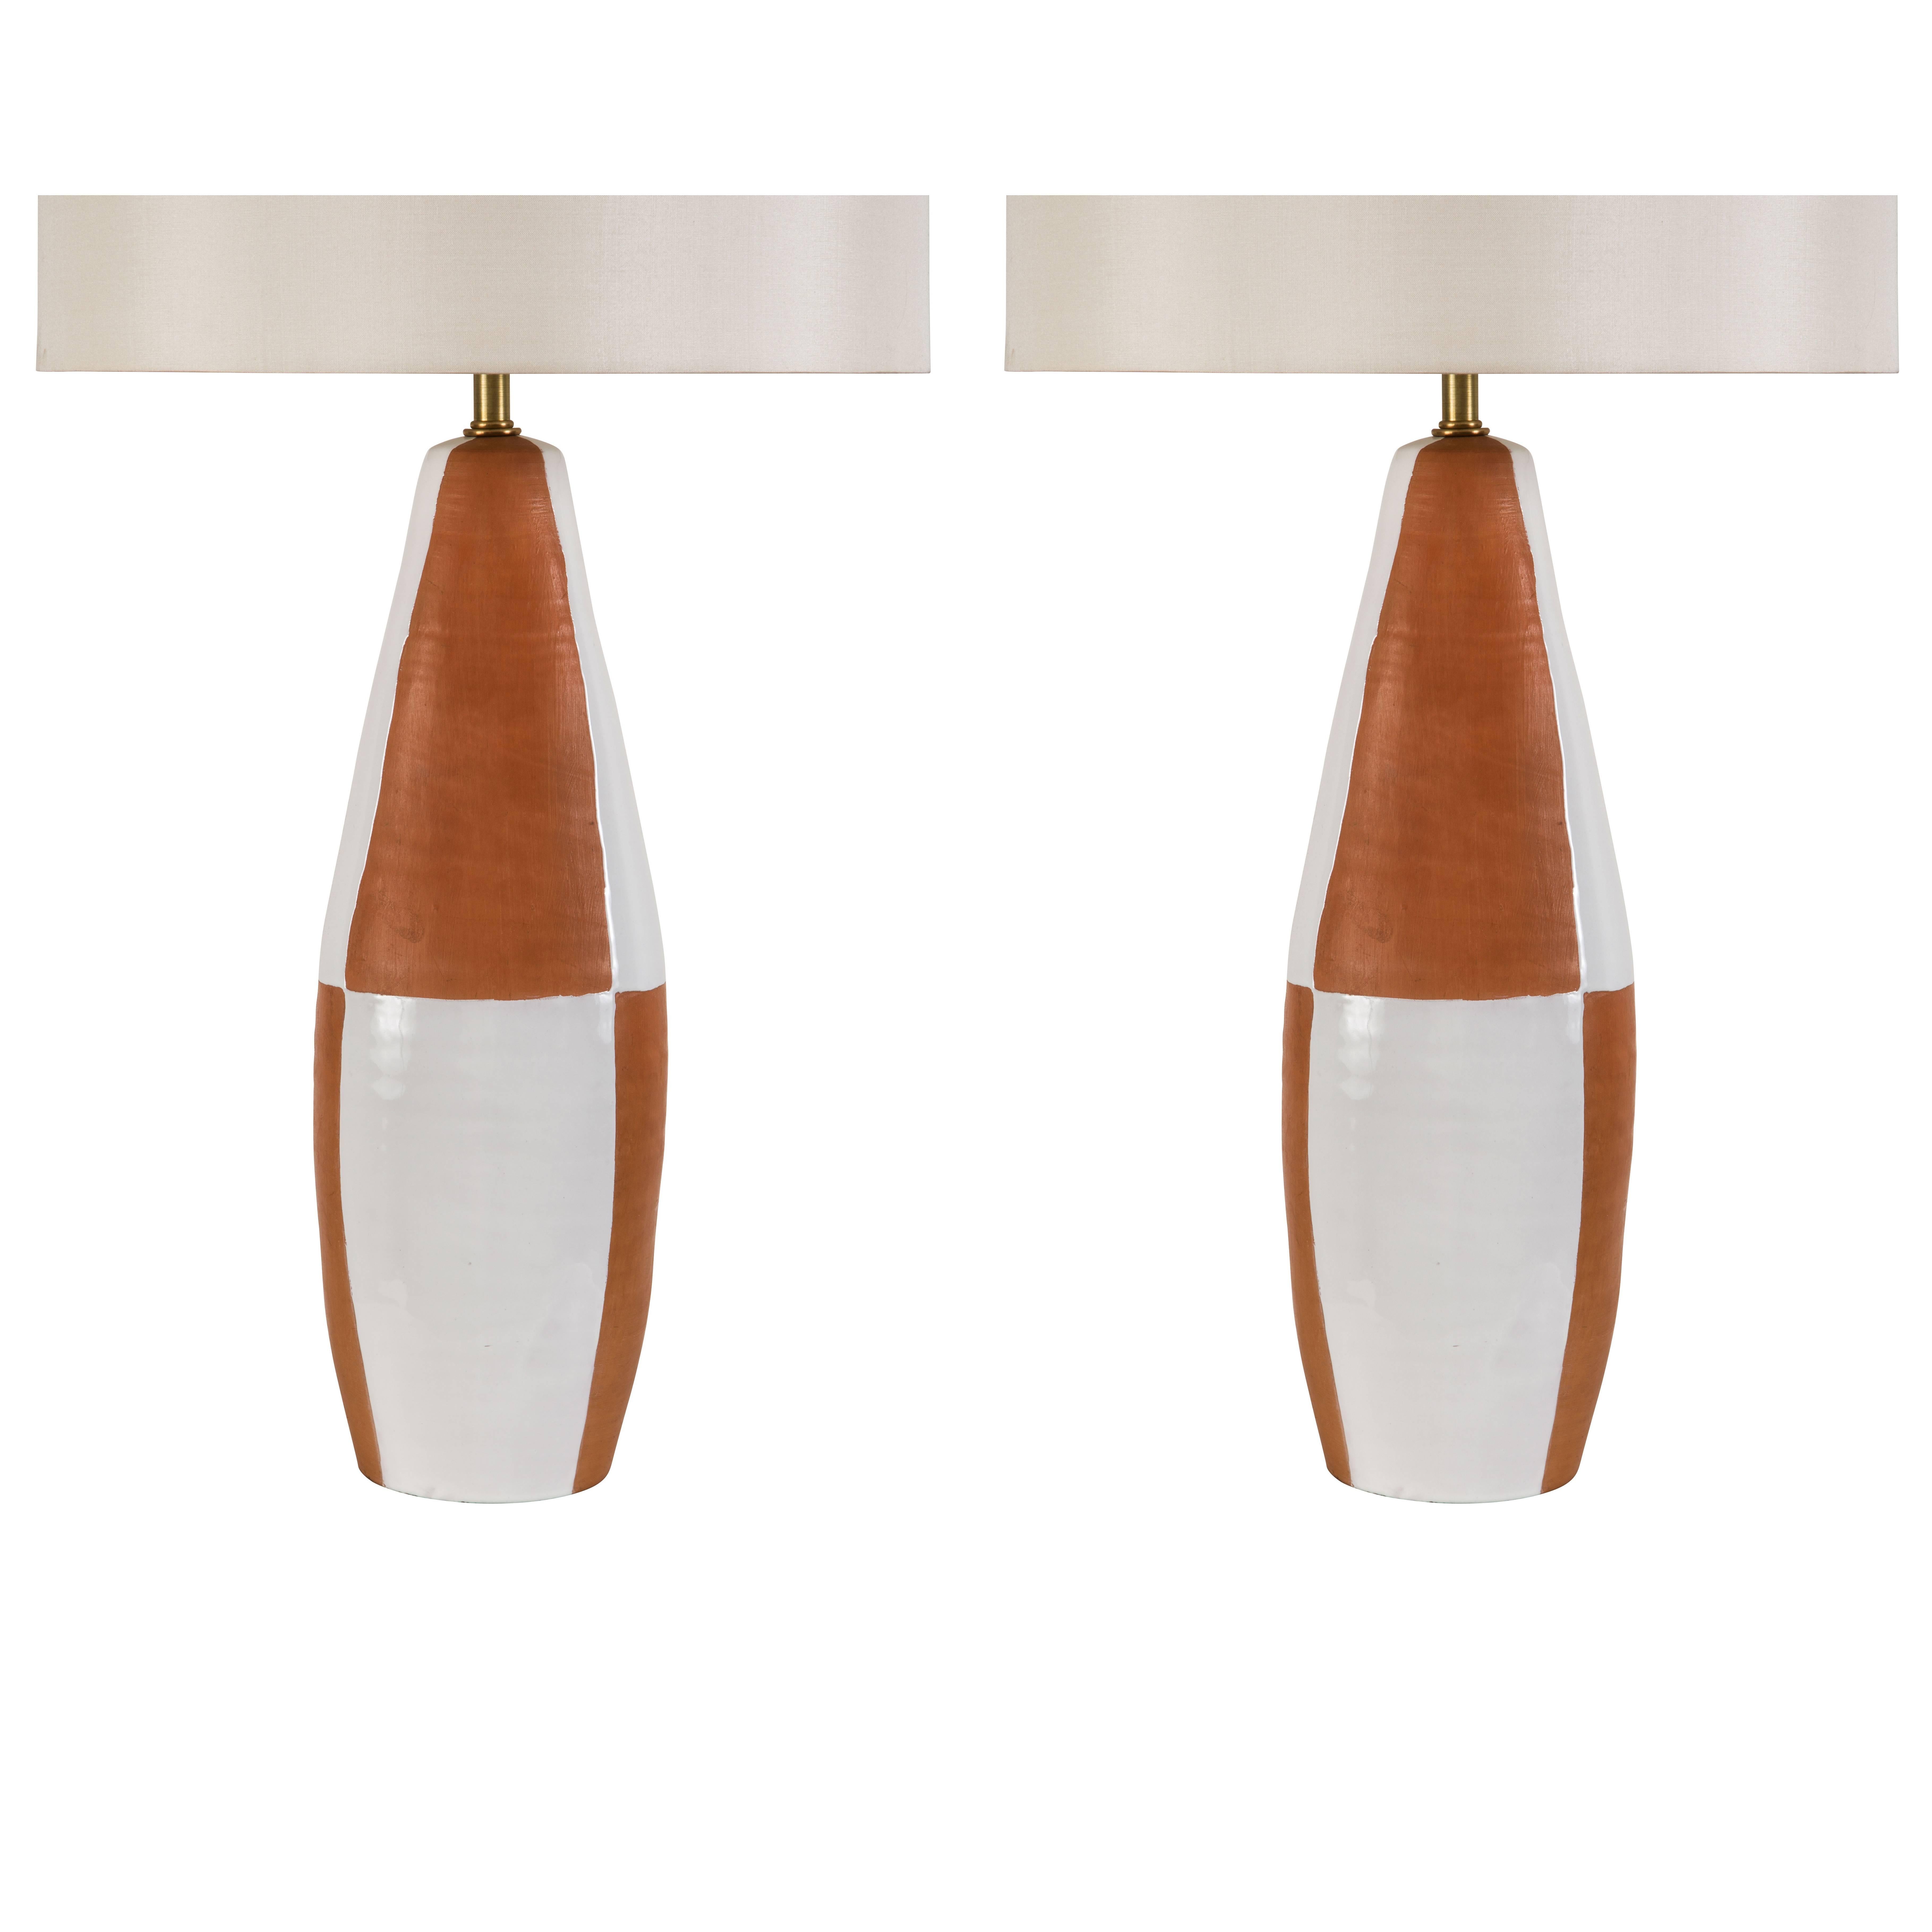 Pair of Ceramic Table Lamps by Bitossi